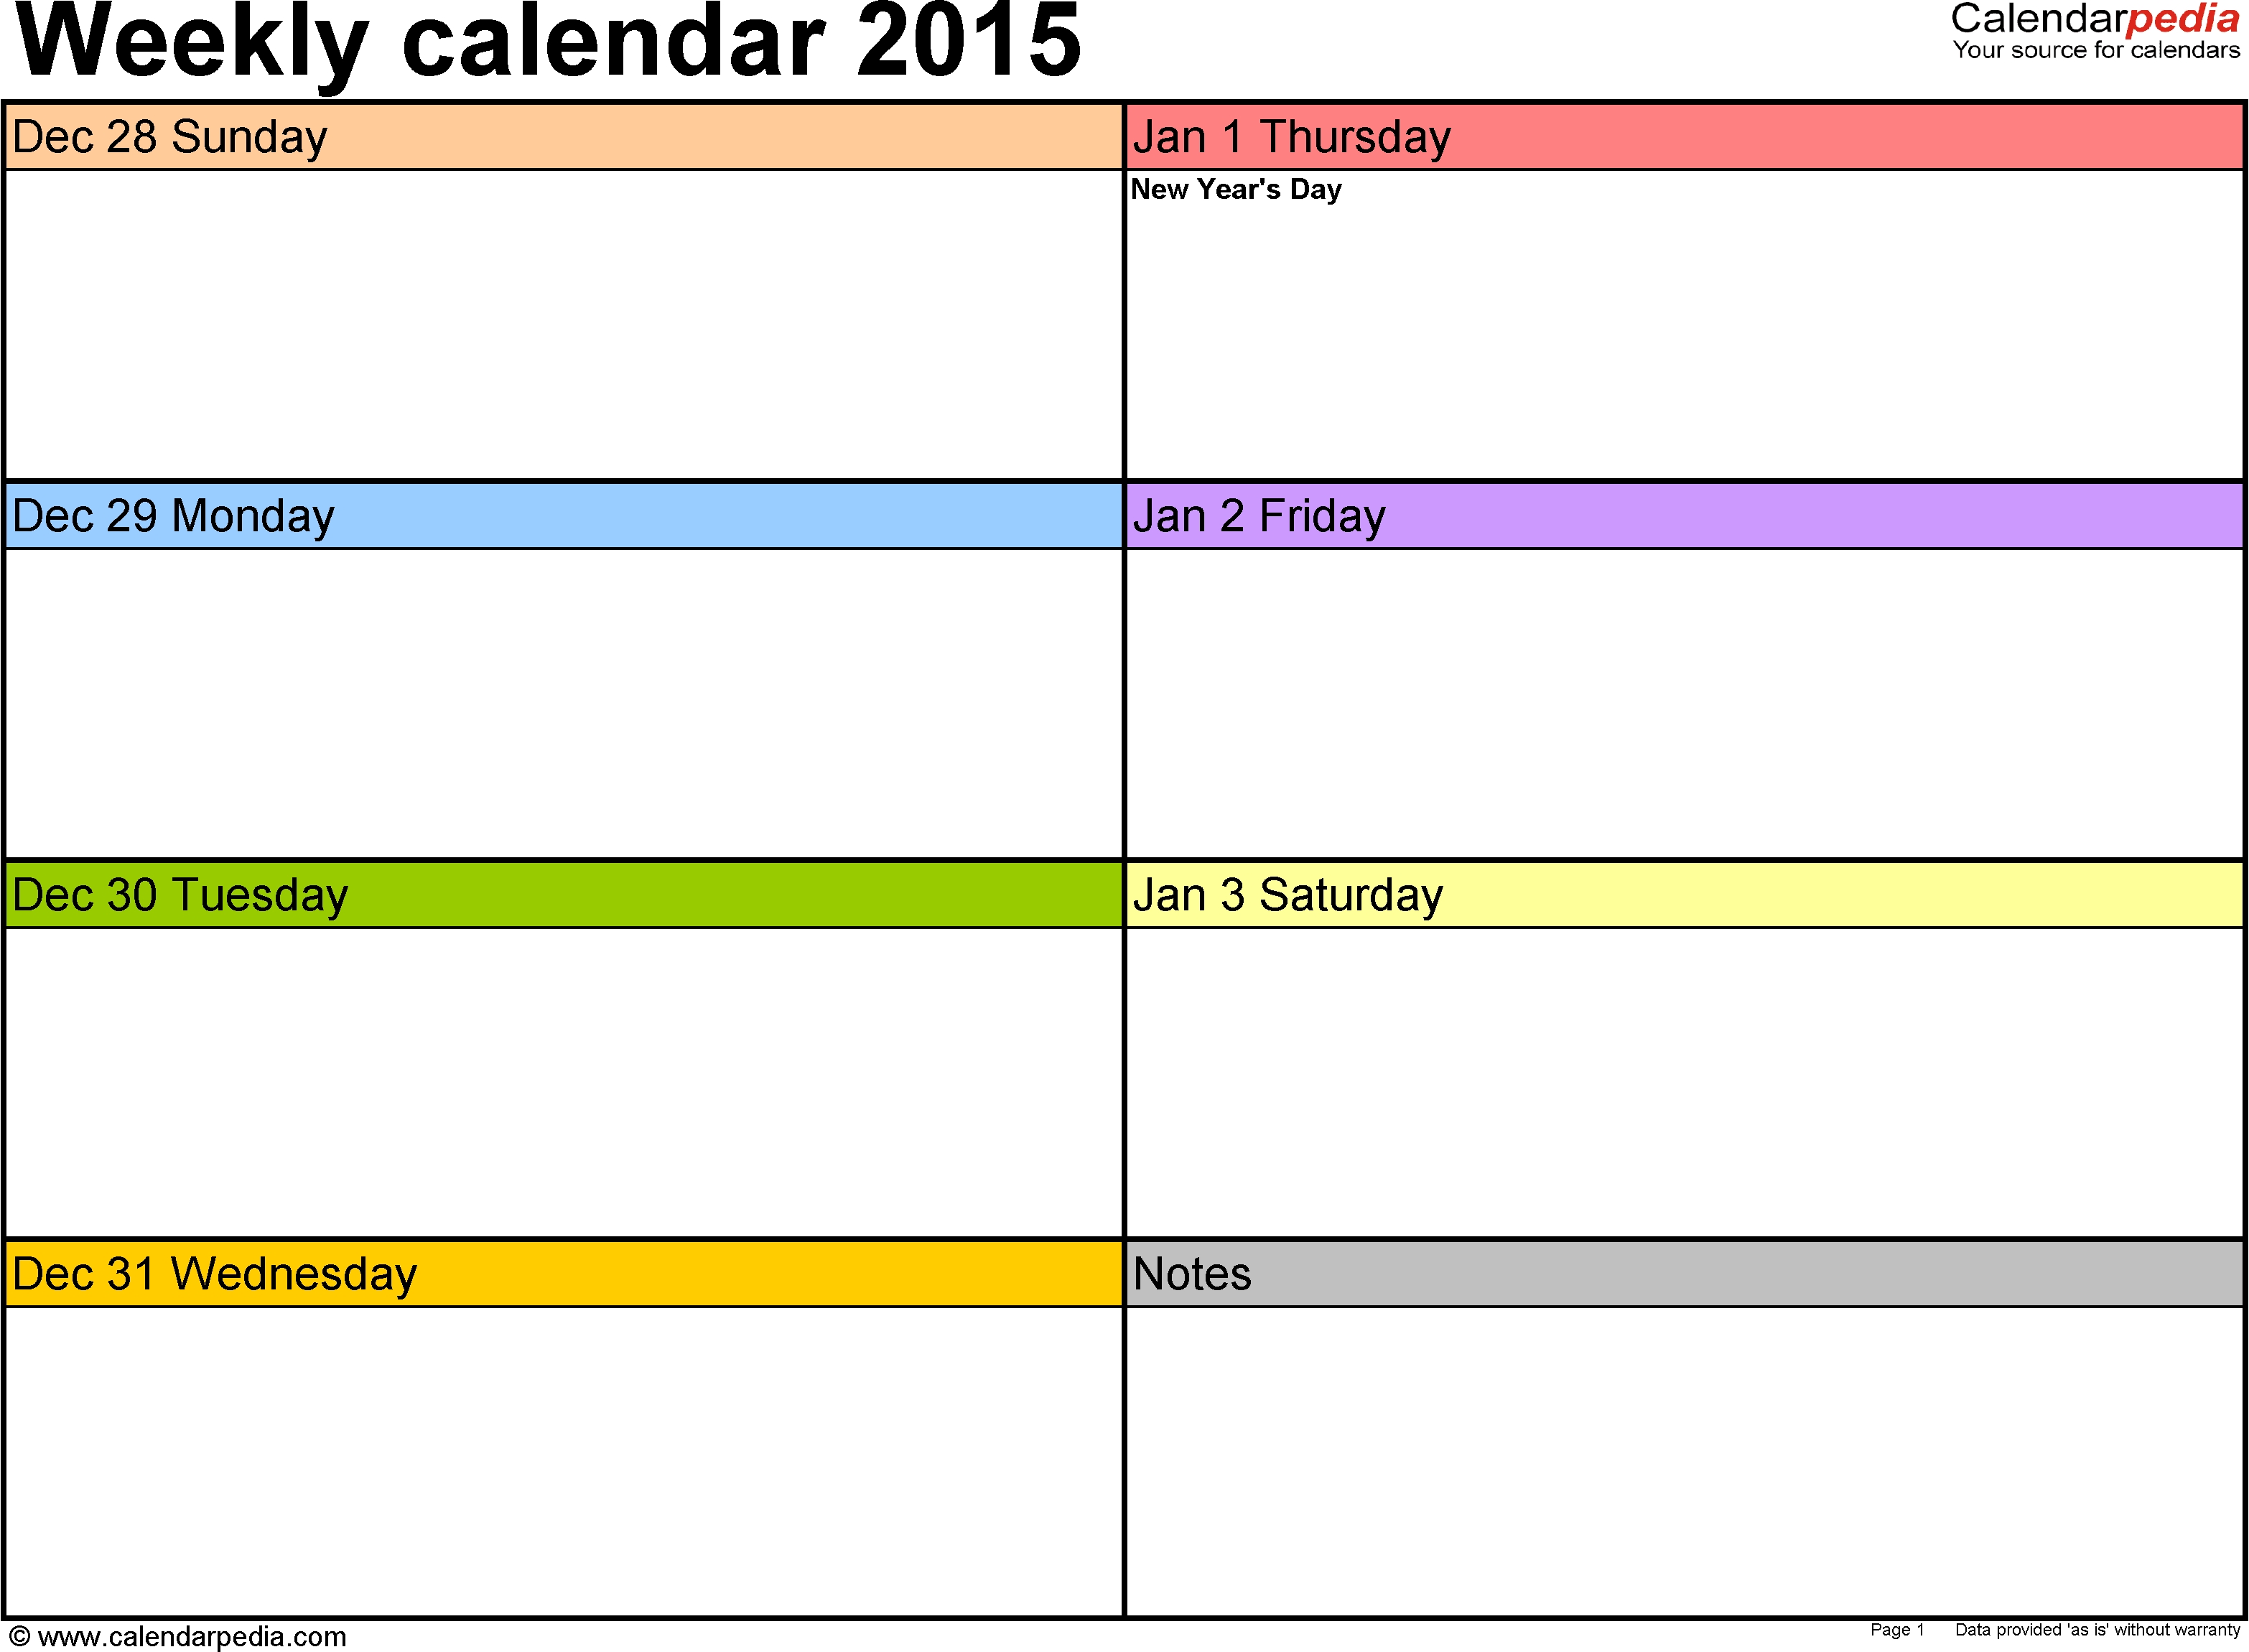 Weekly Calendars 2015 For Word - 12 Free Printable Templates